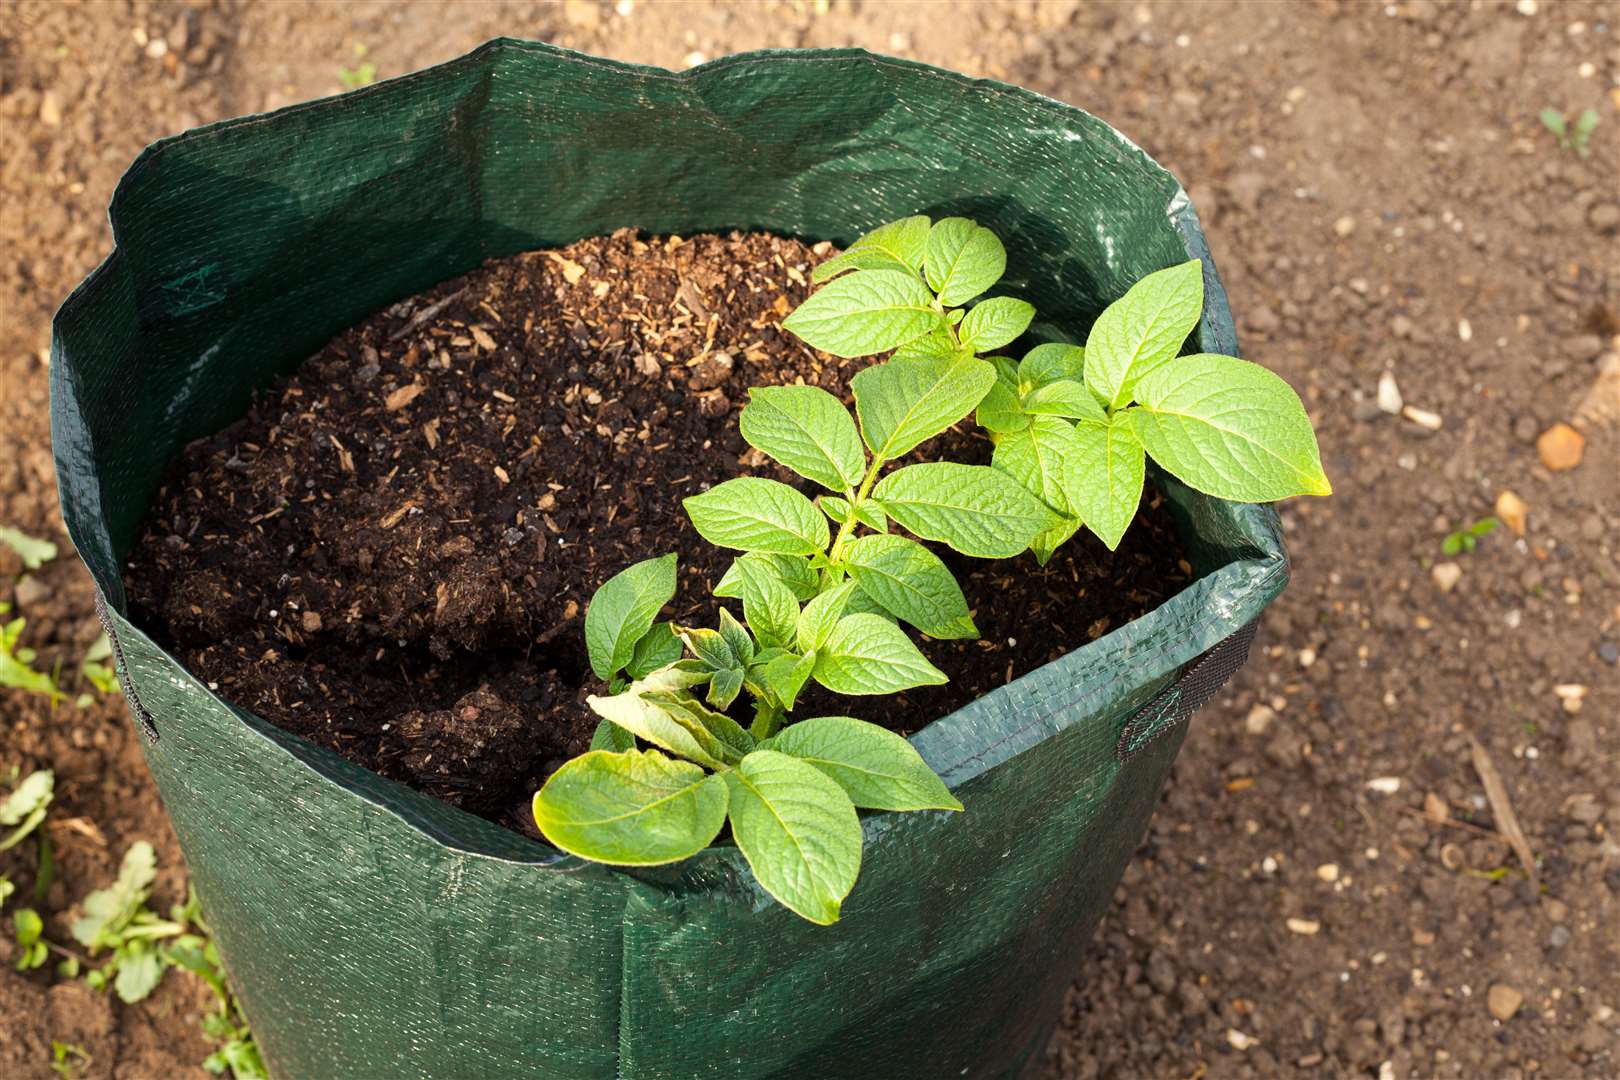 You can grow potatoes in even the smallest spaces.